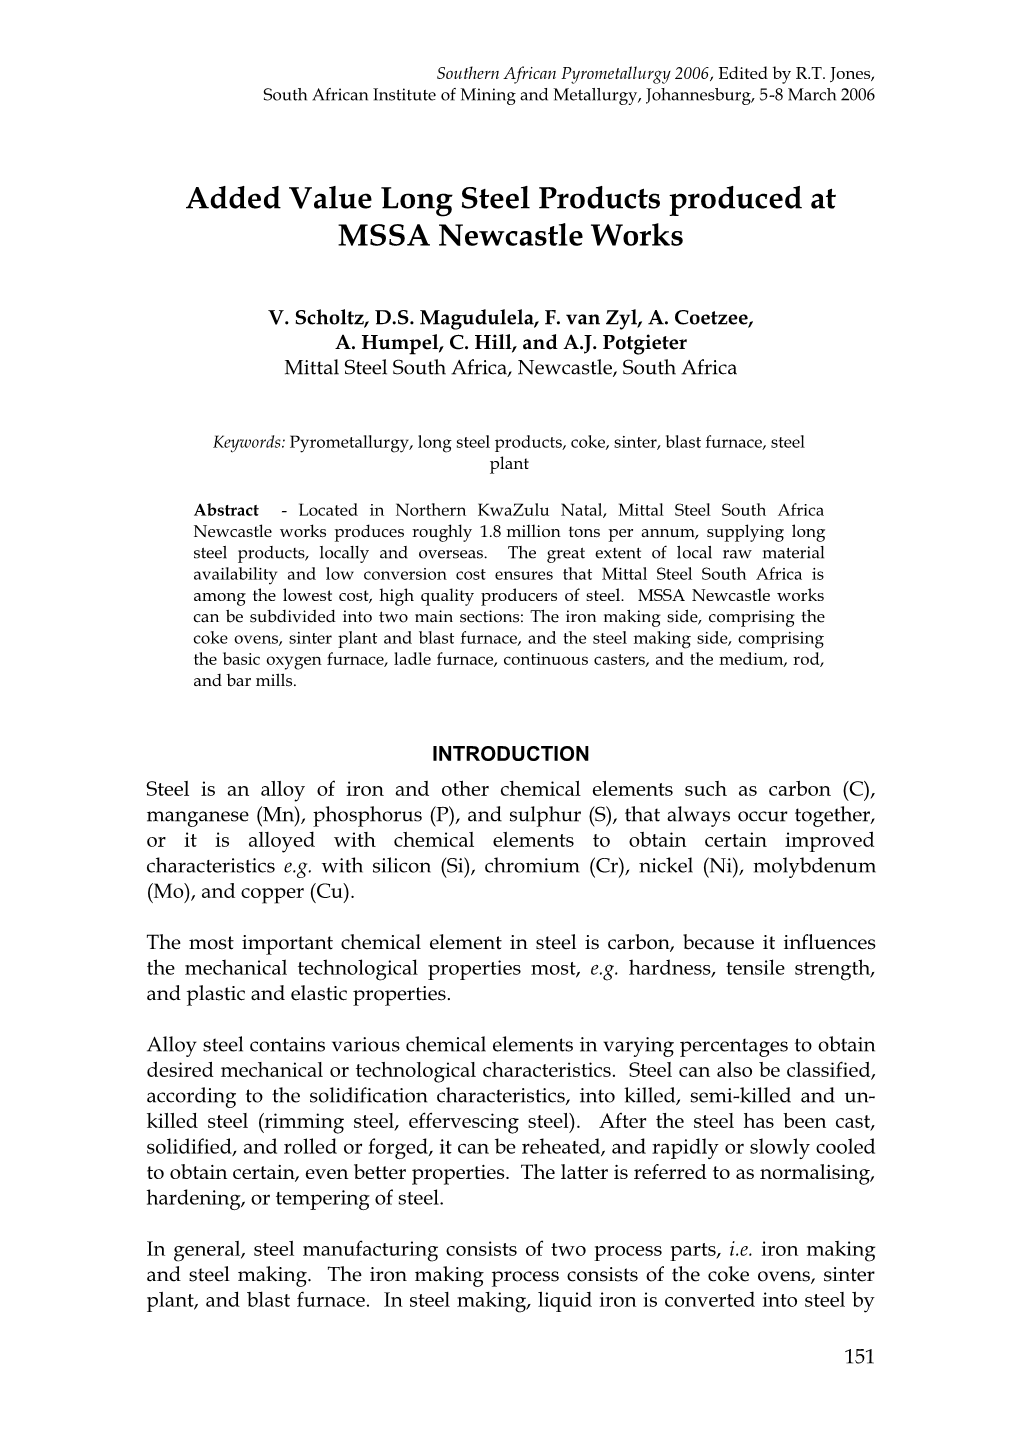 Added Value Long Steel Products Produced at MSSA Newcastle Works